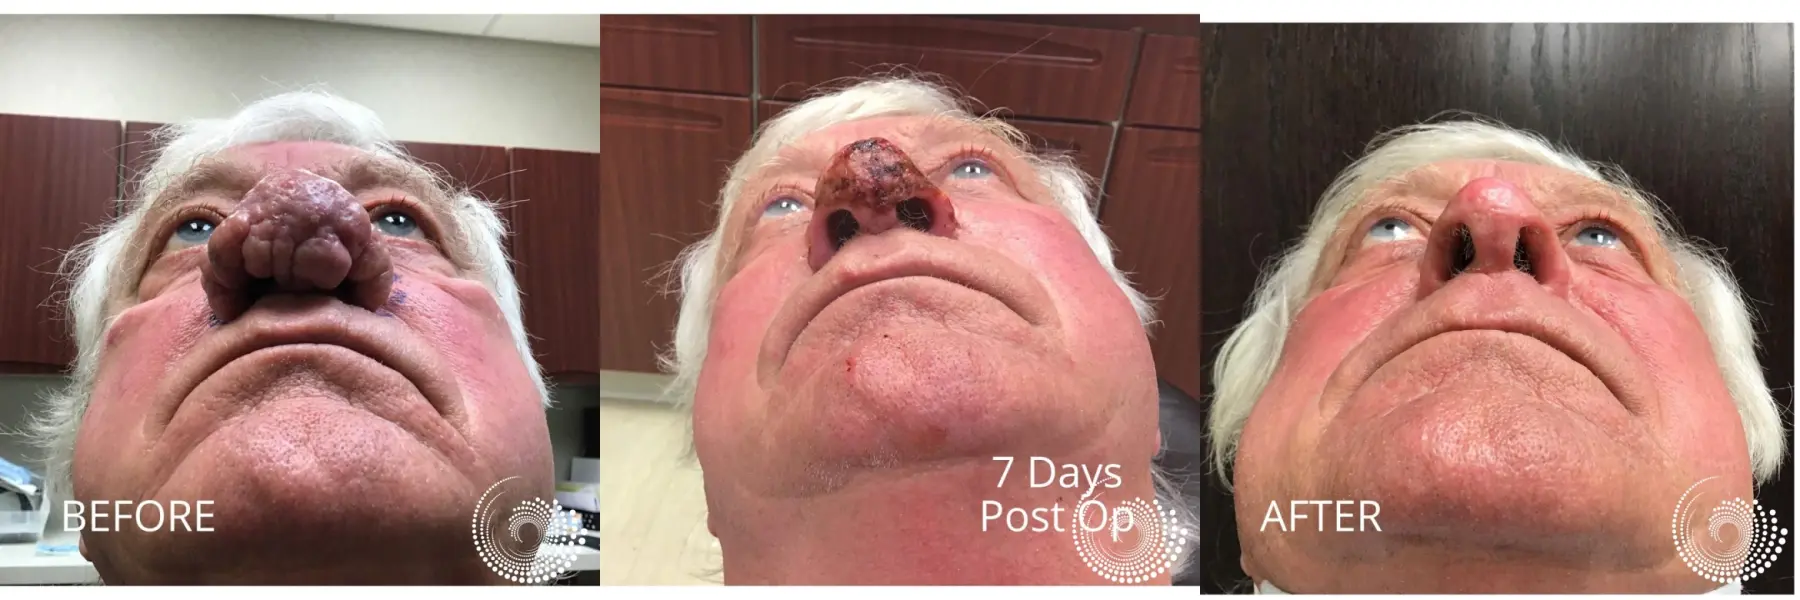 Rhinophyma treatment to restore nose - Before and After 4